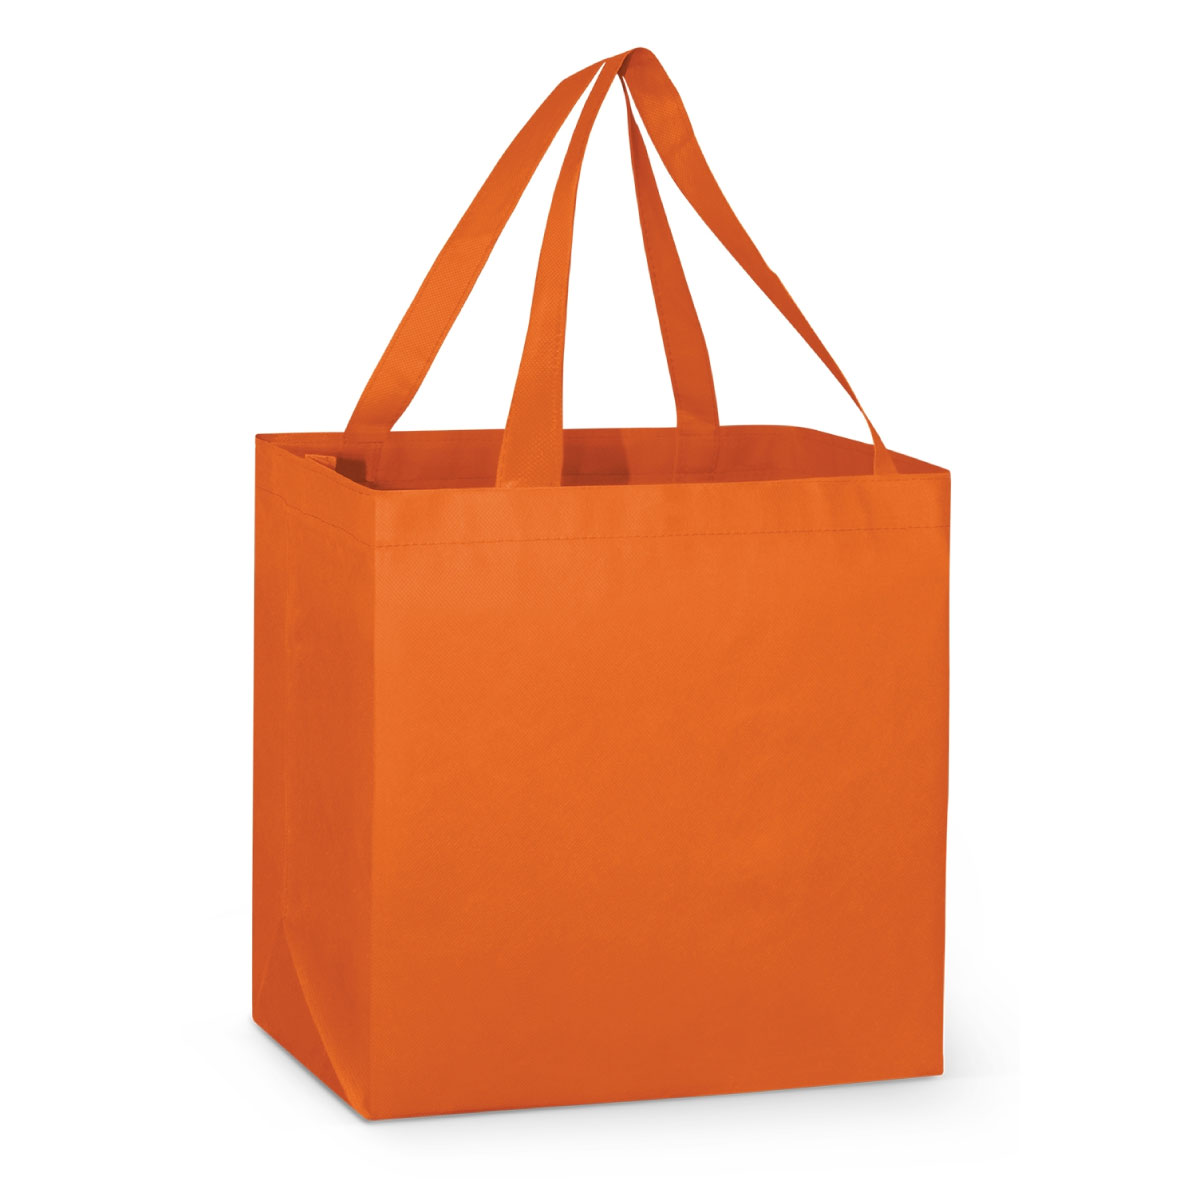 Promotional Shopping Bags | Promotion Products